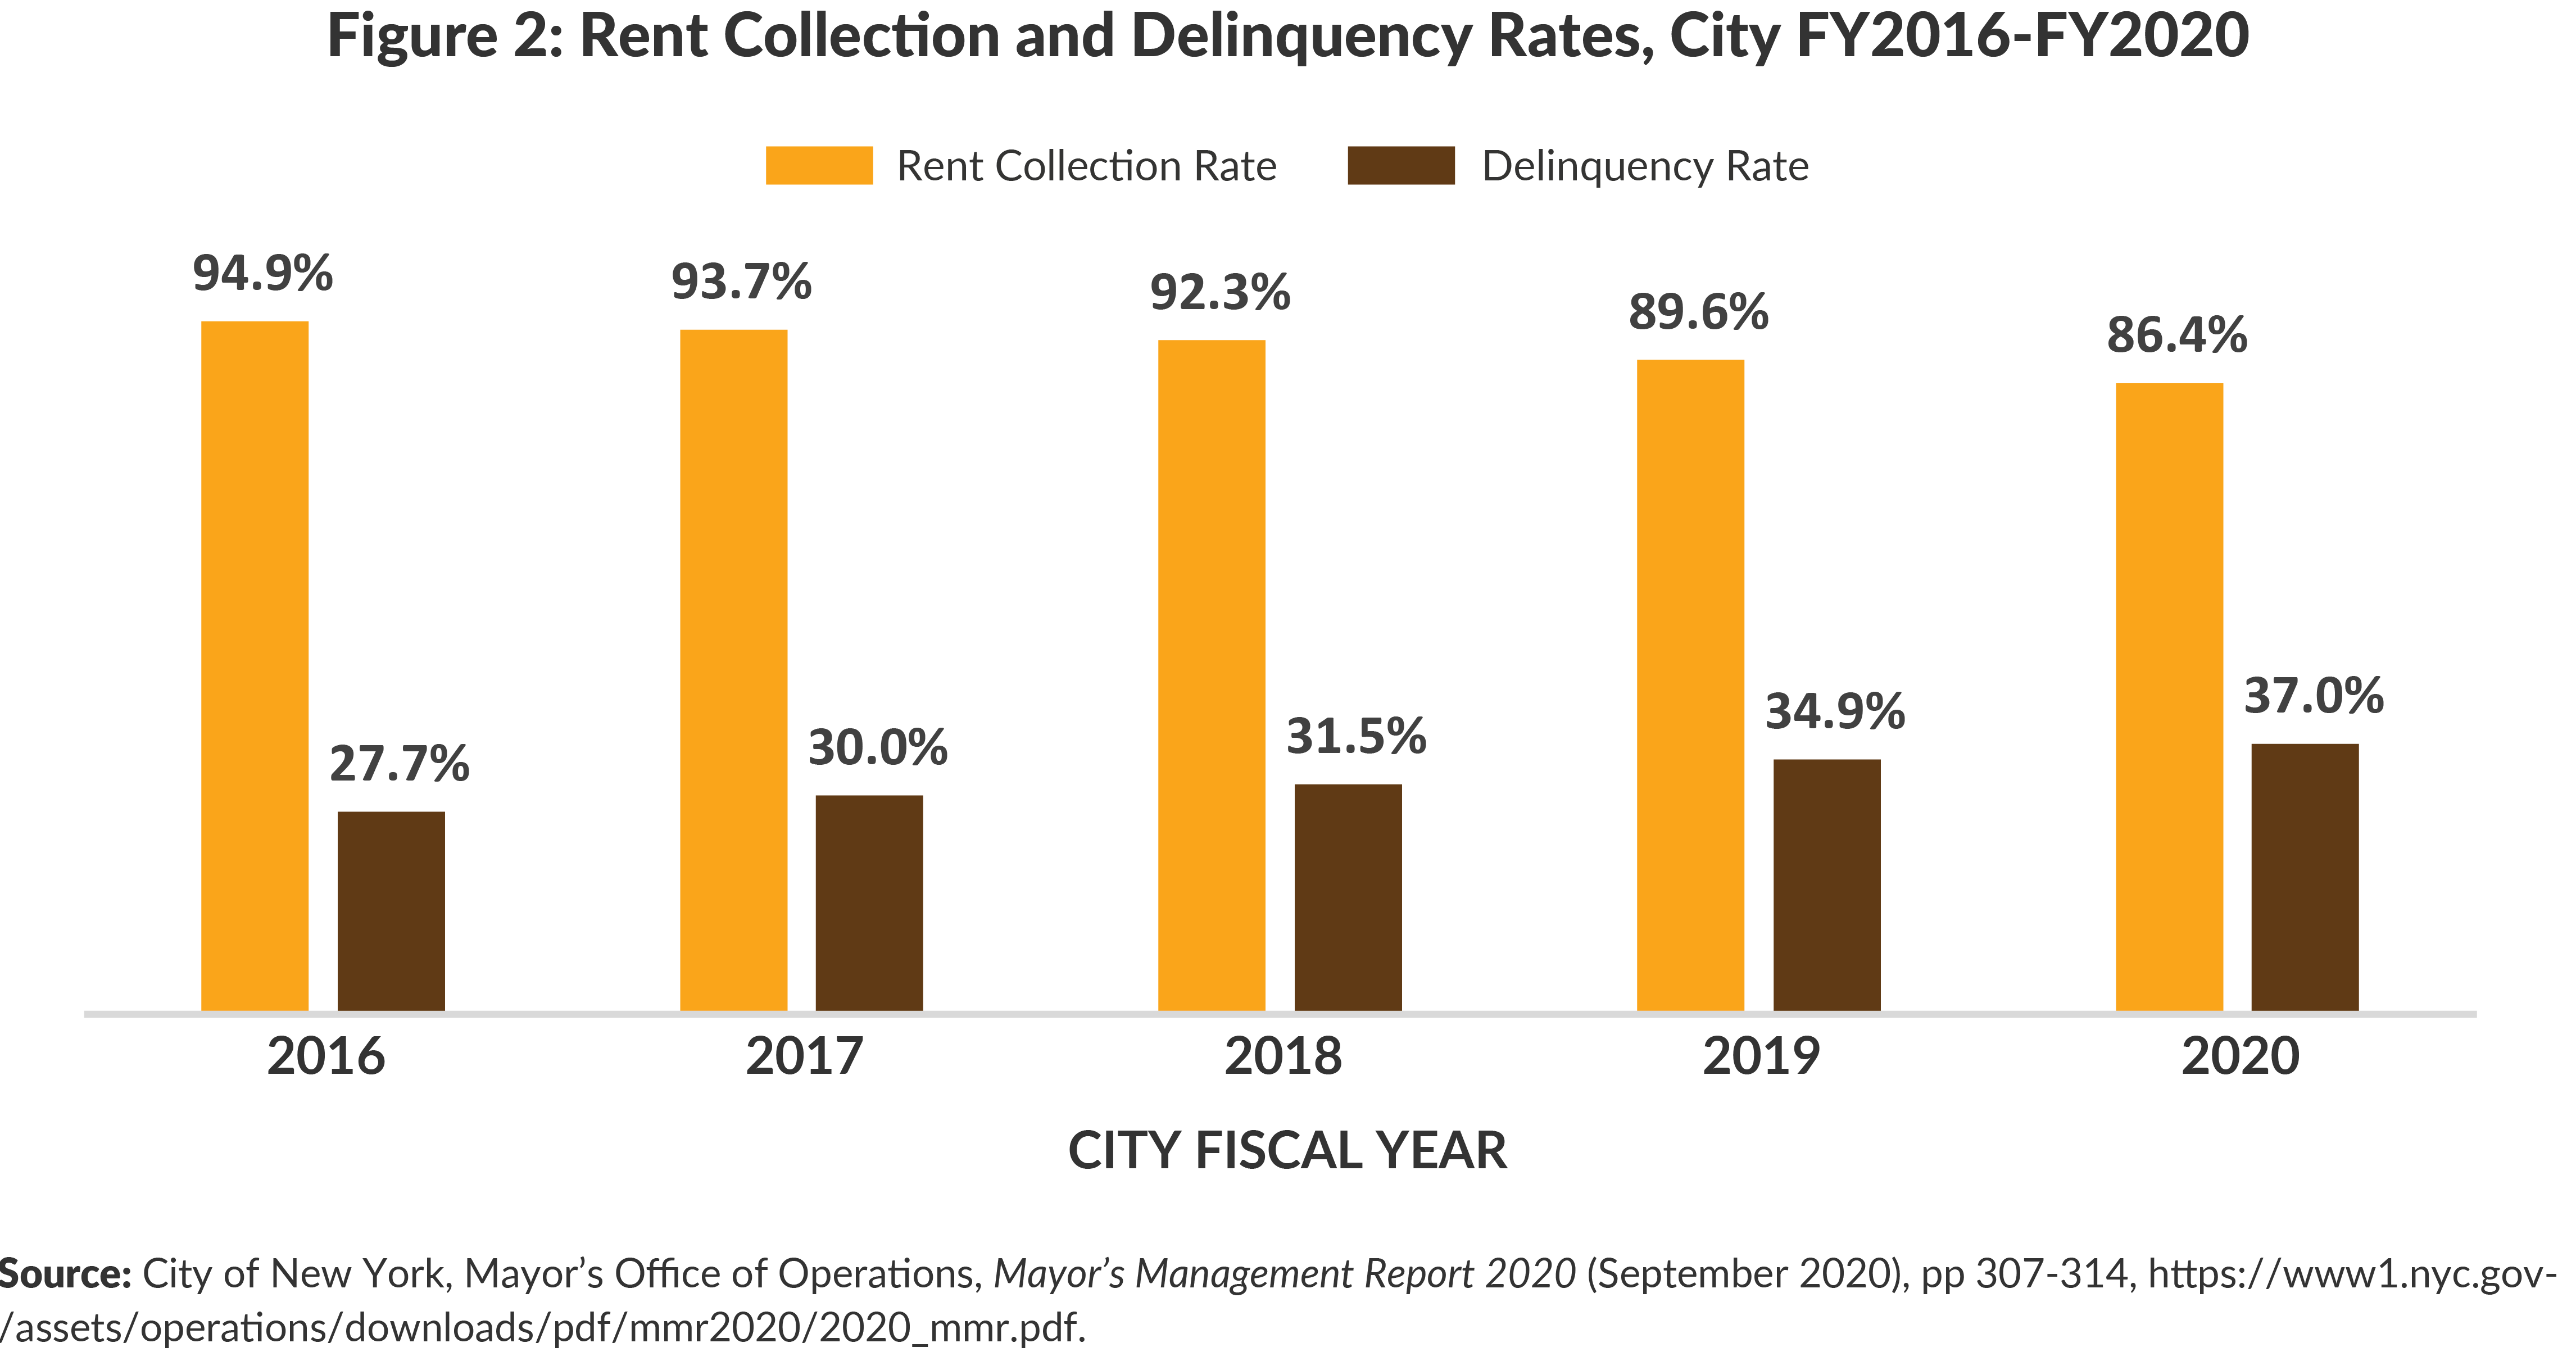 Figure 2. Rent Collection and Delinquency Rates by City Fiscal Year, 2016-2020